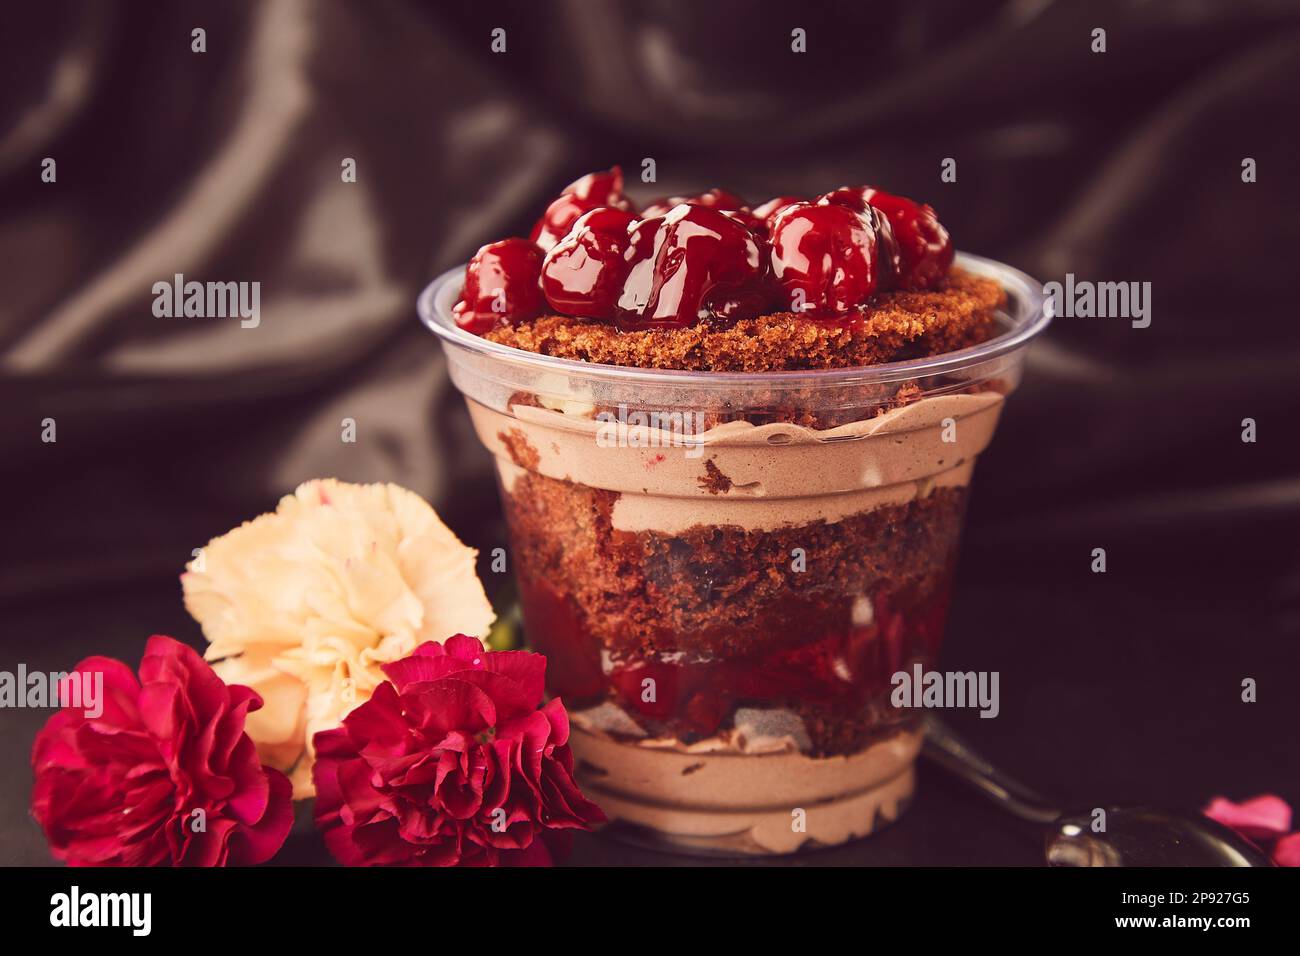 Natural aesthetic sugar free, vegan, healthy layered dessert with fresh cherry. Catering, desserts in portions. Stock Photo